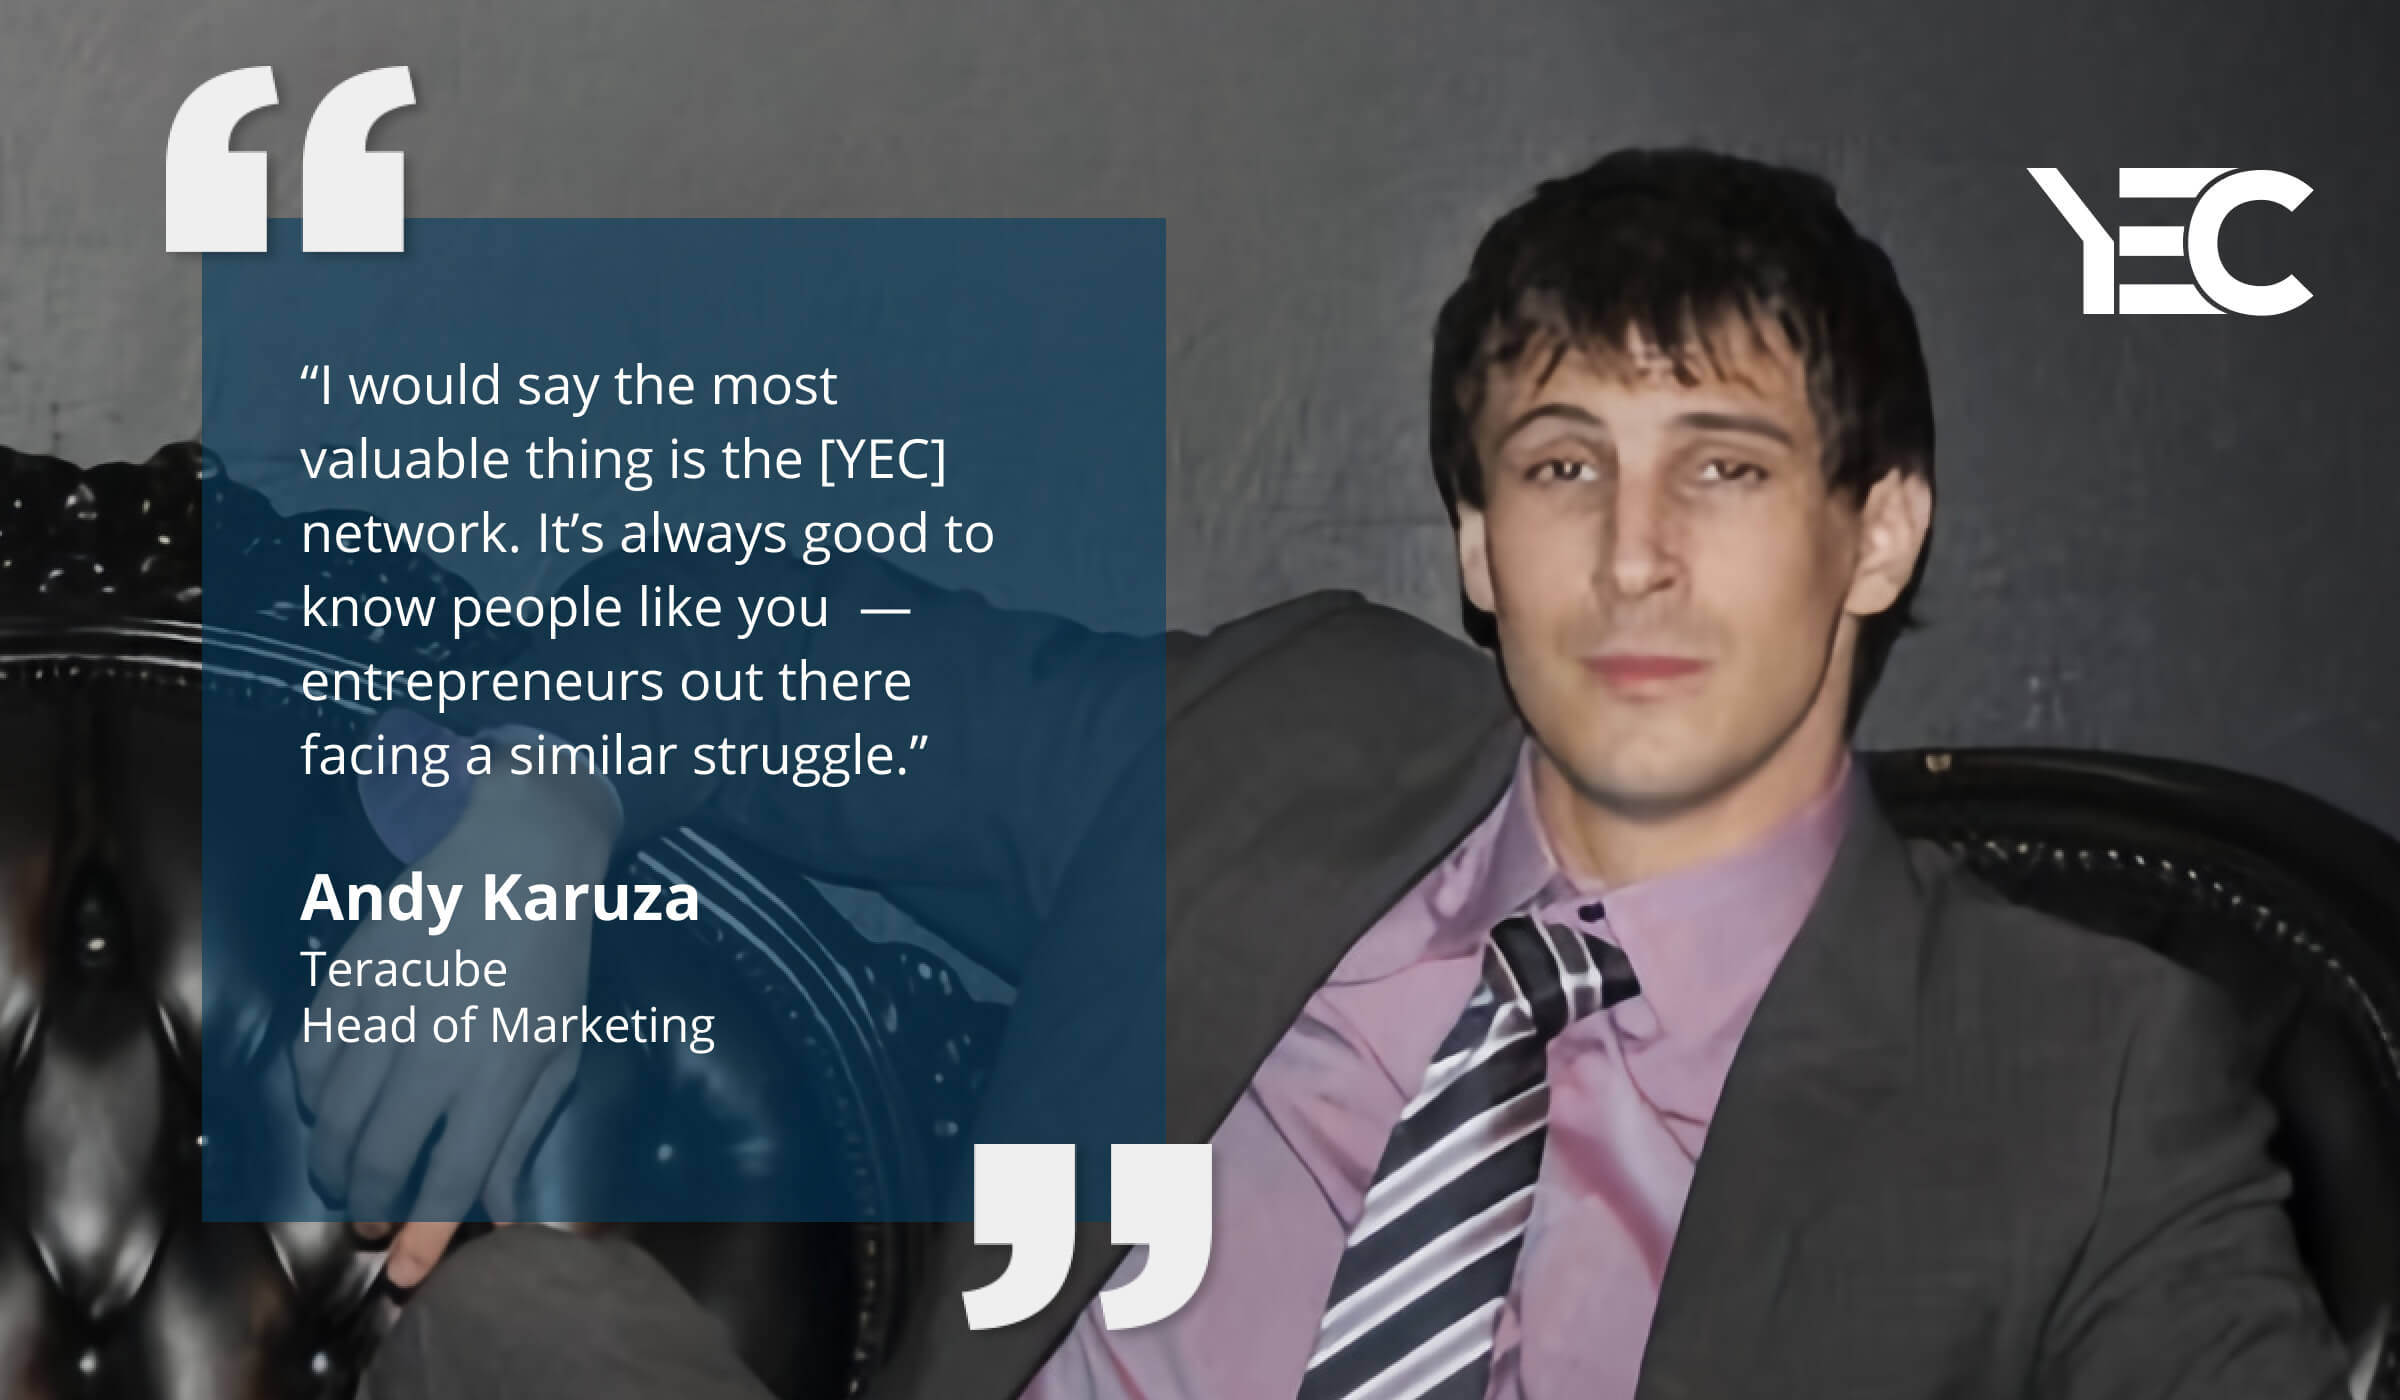 Andy Karuza Says YEC is a Valuable Network for Entrepreneurs Facing Shared Struggles